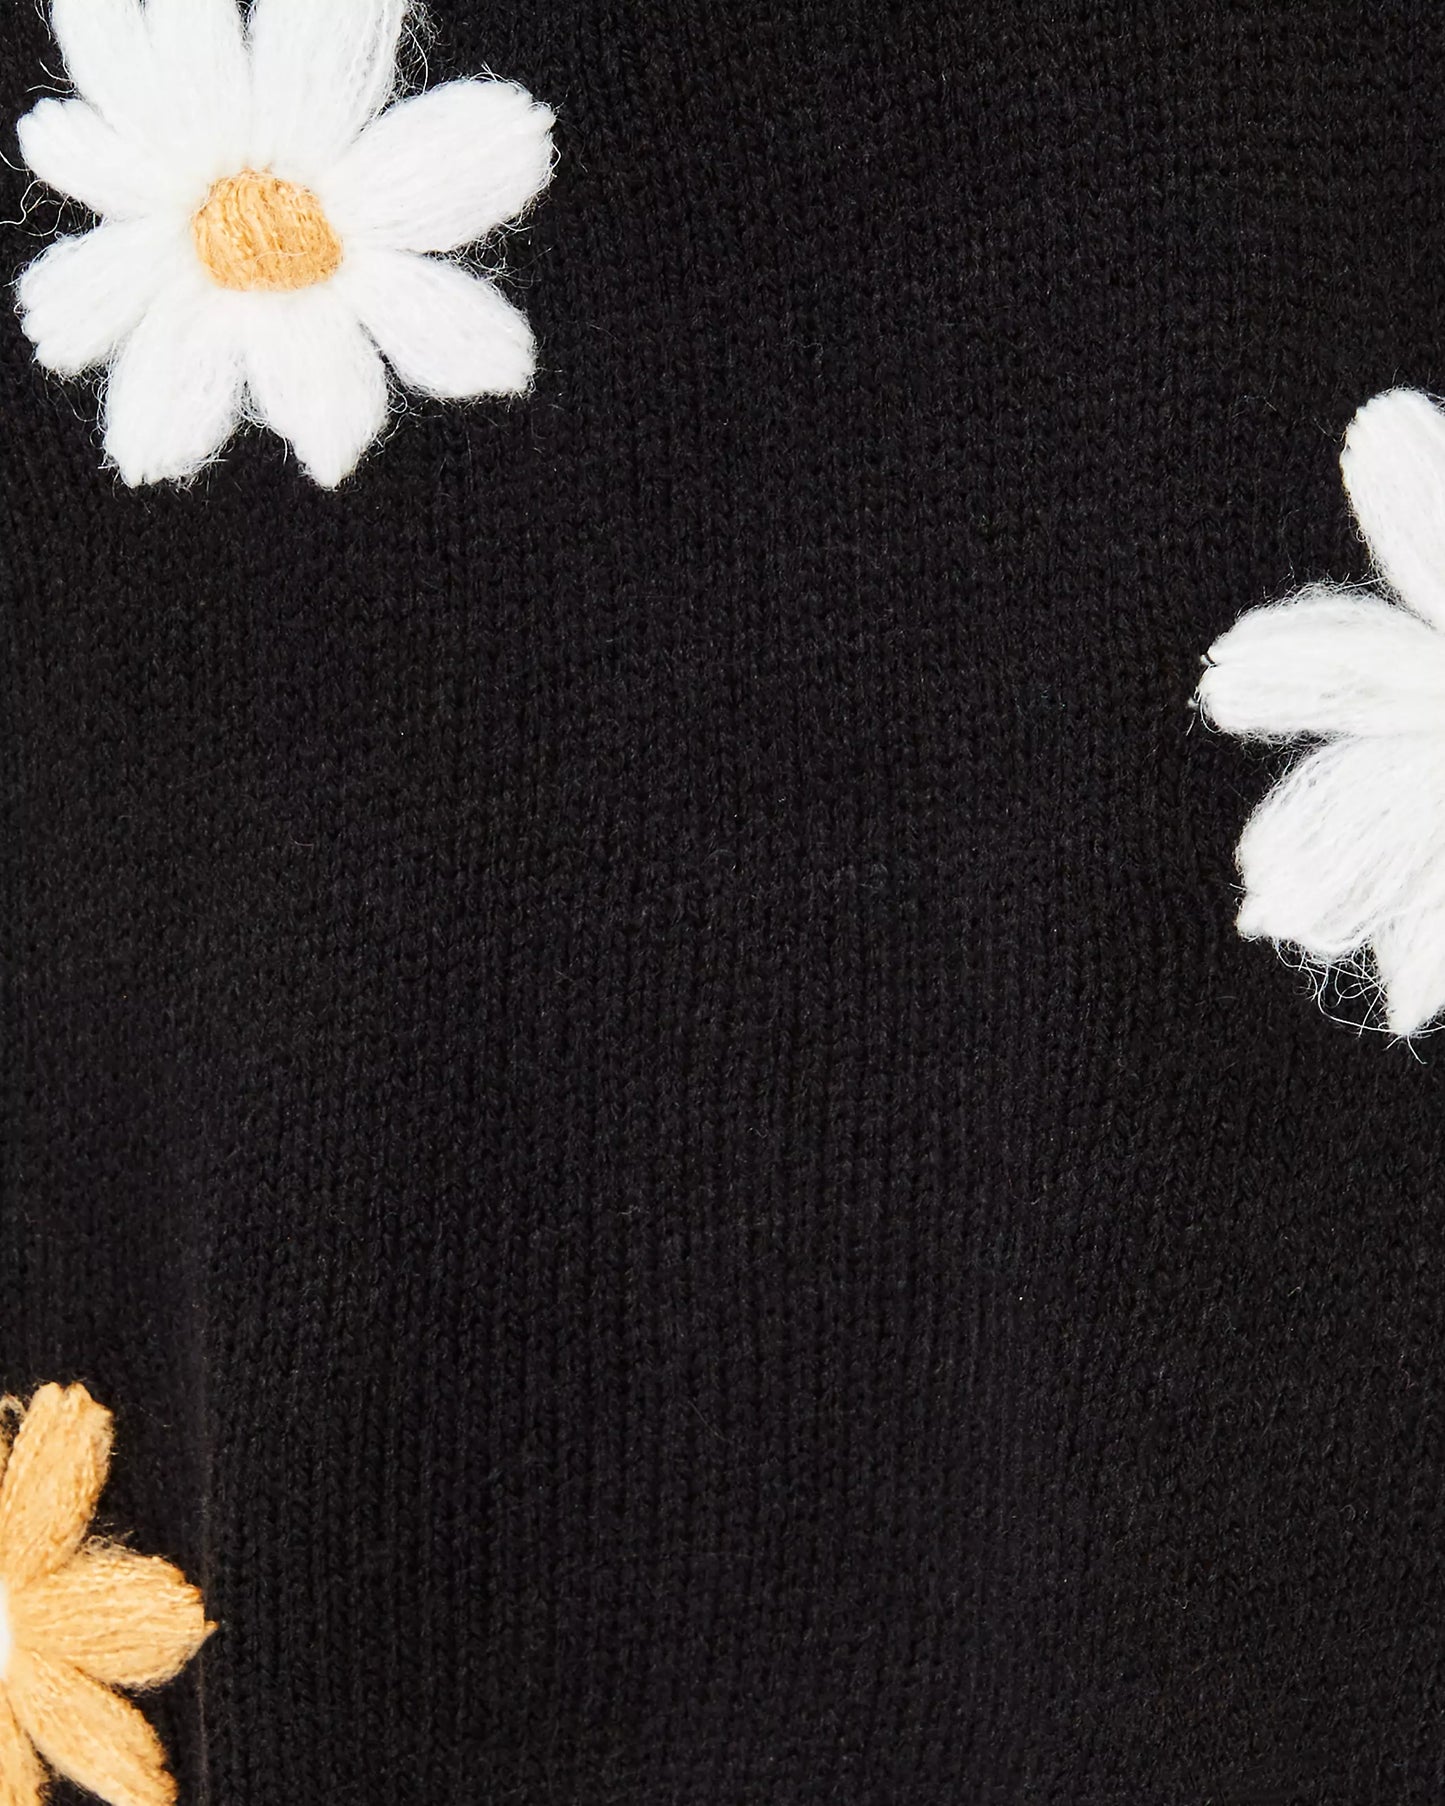 TENSLEY SWEATER, BLACK BLOOMING EMBROIDERY